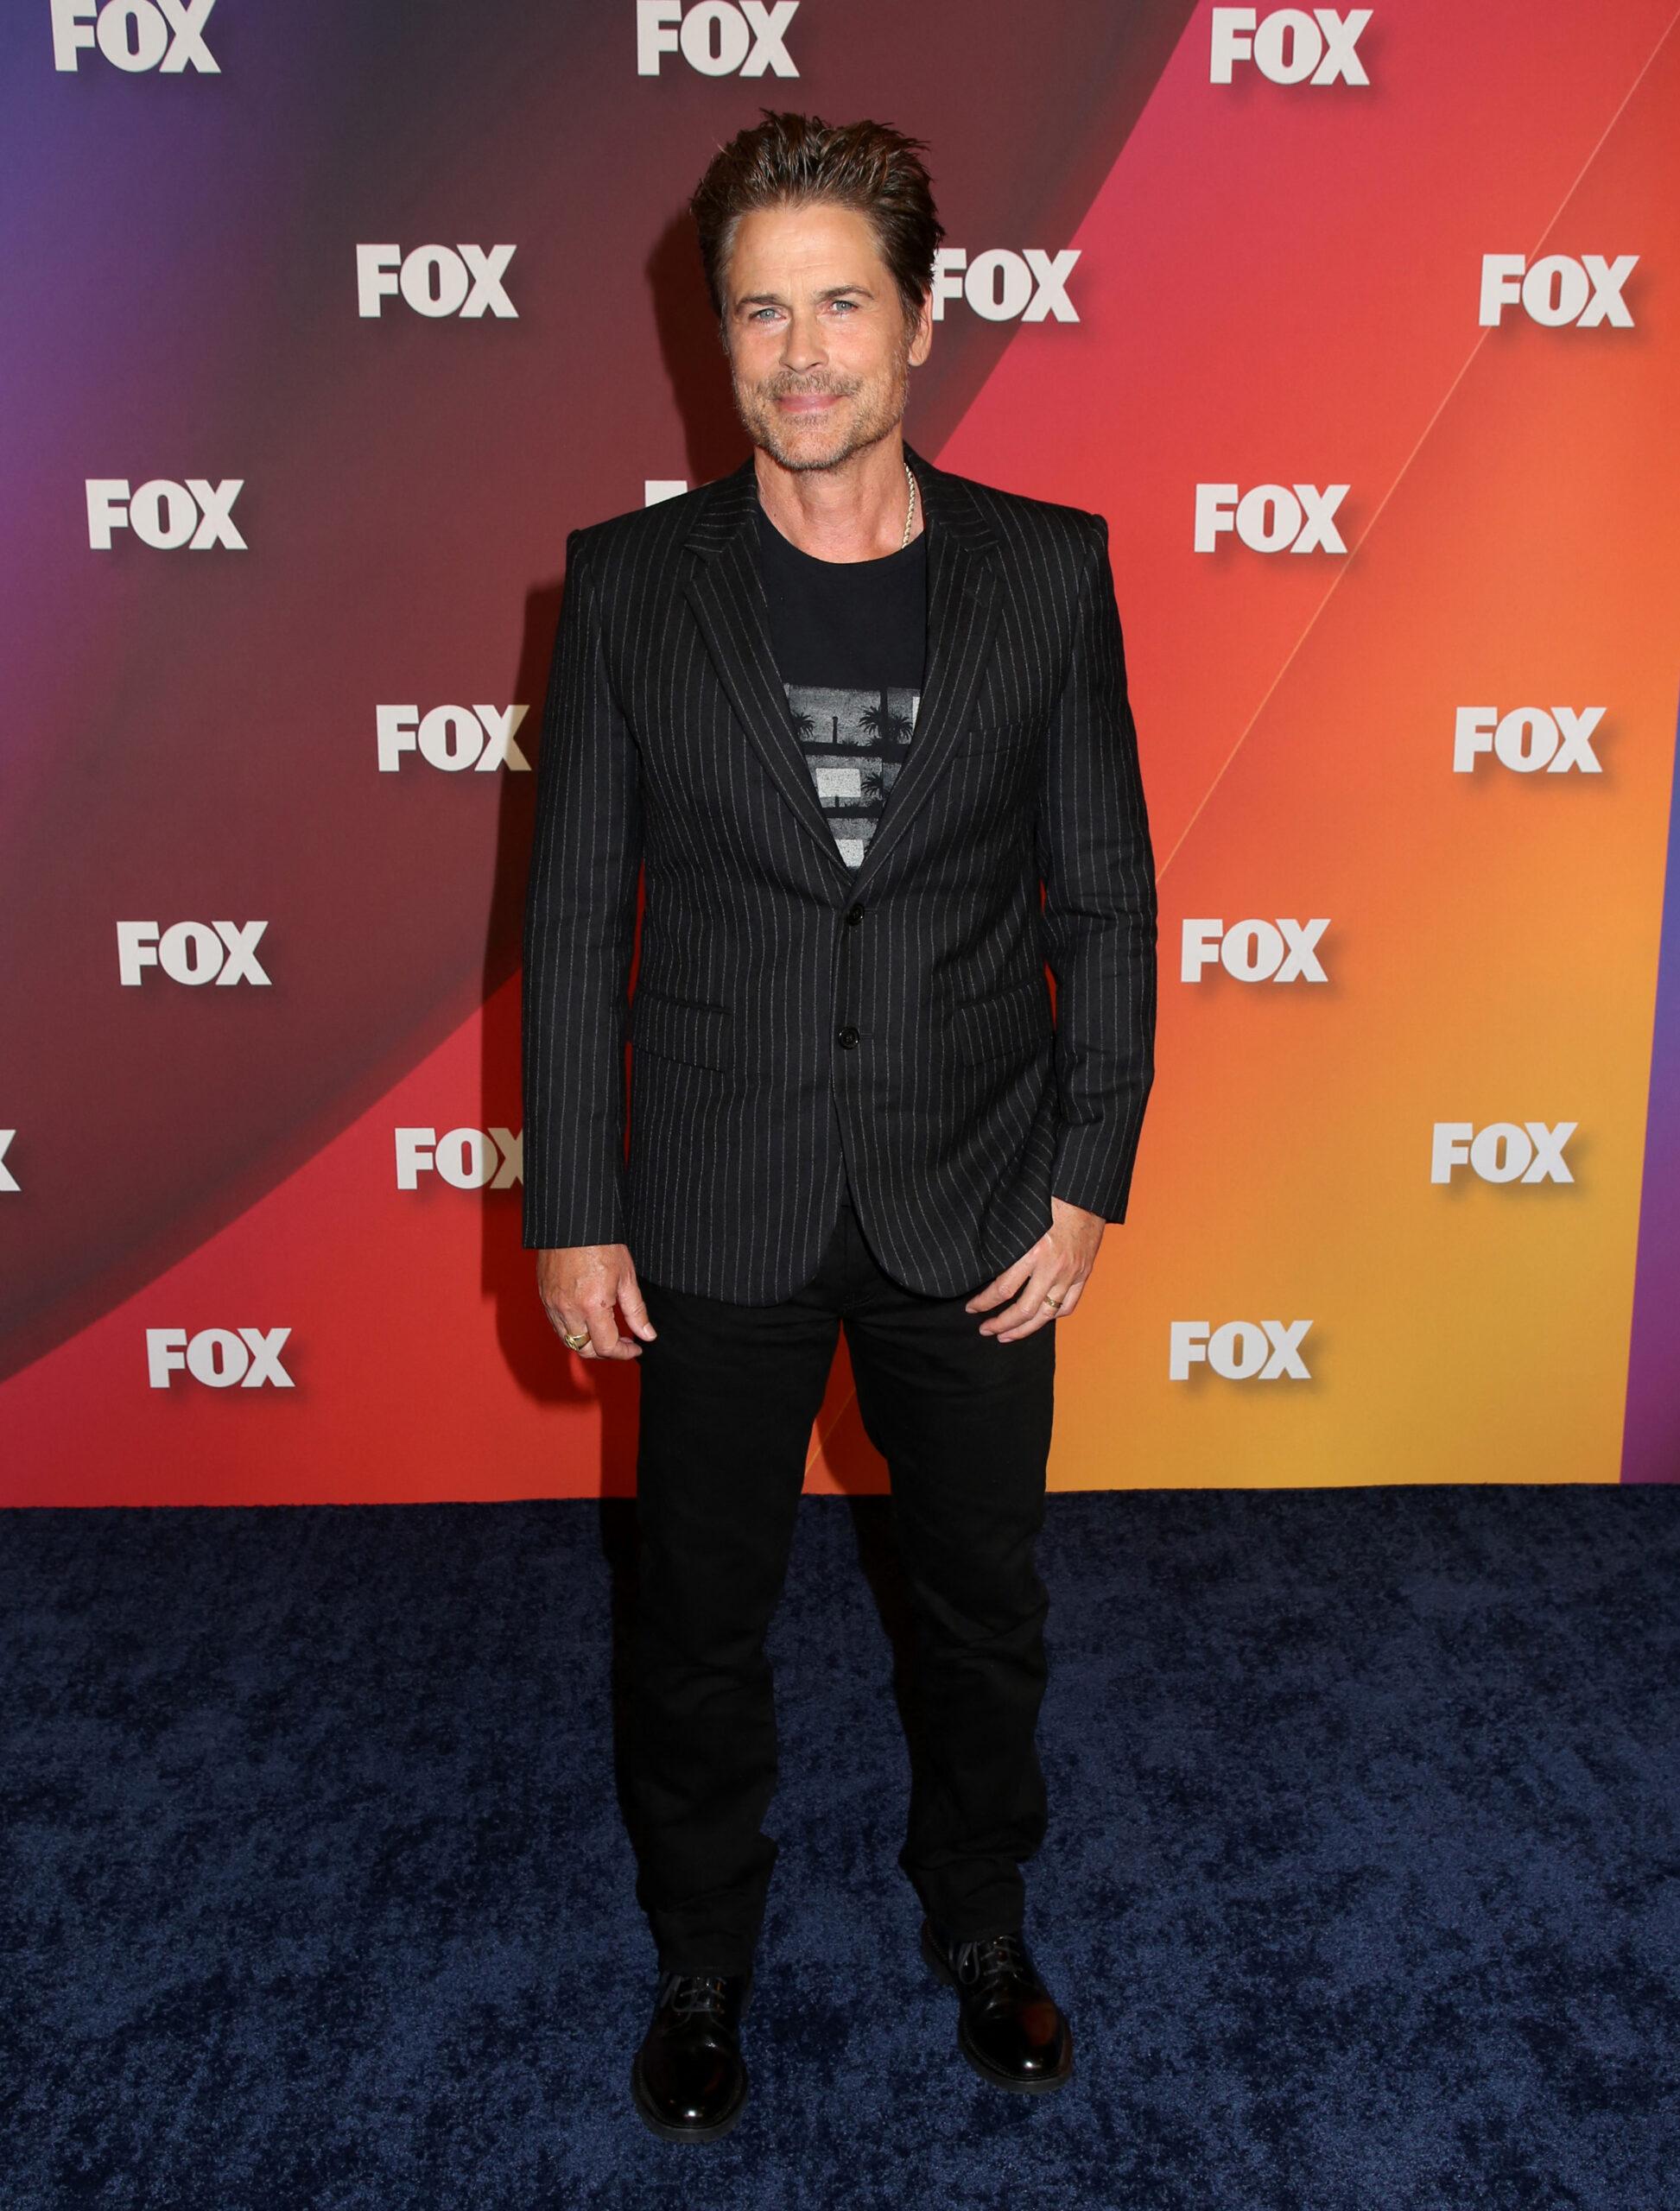 Rob Lowe at the FOX 2022 Upfront